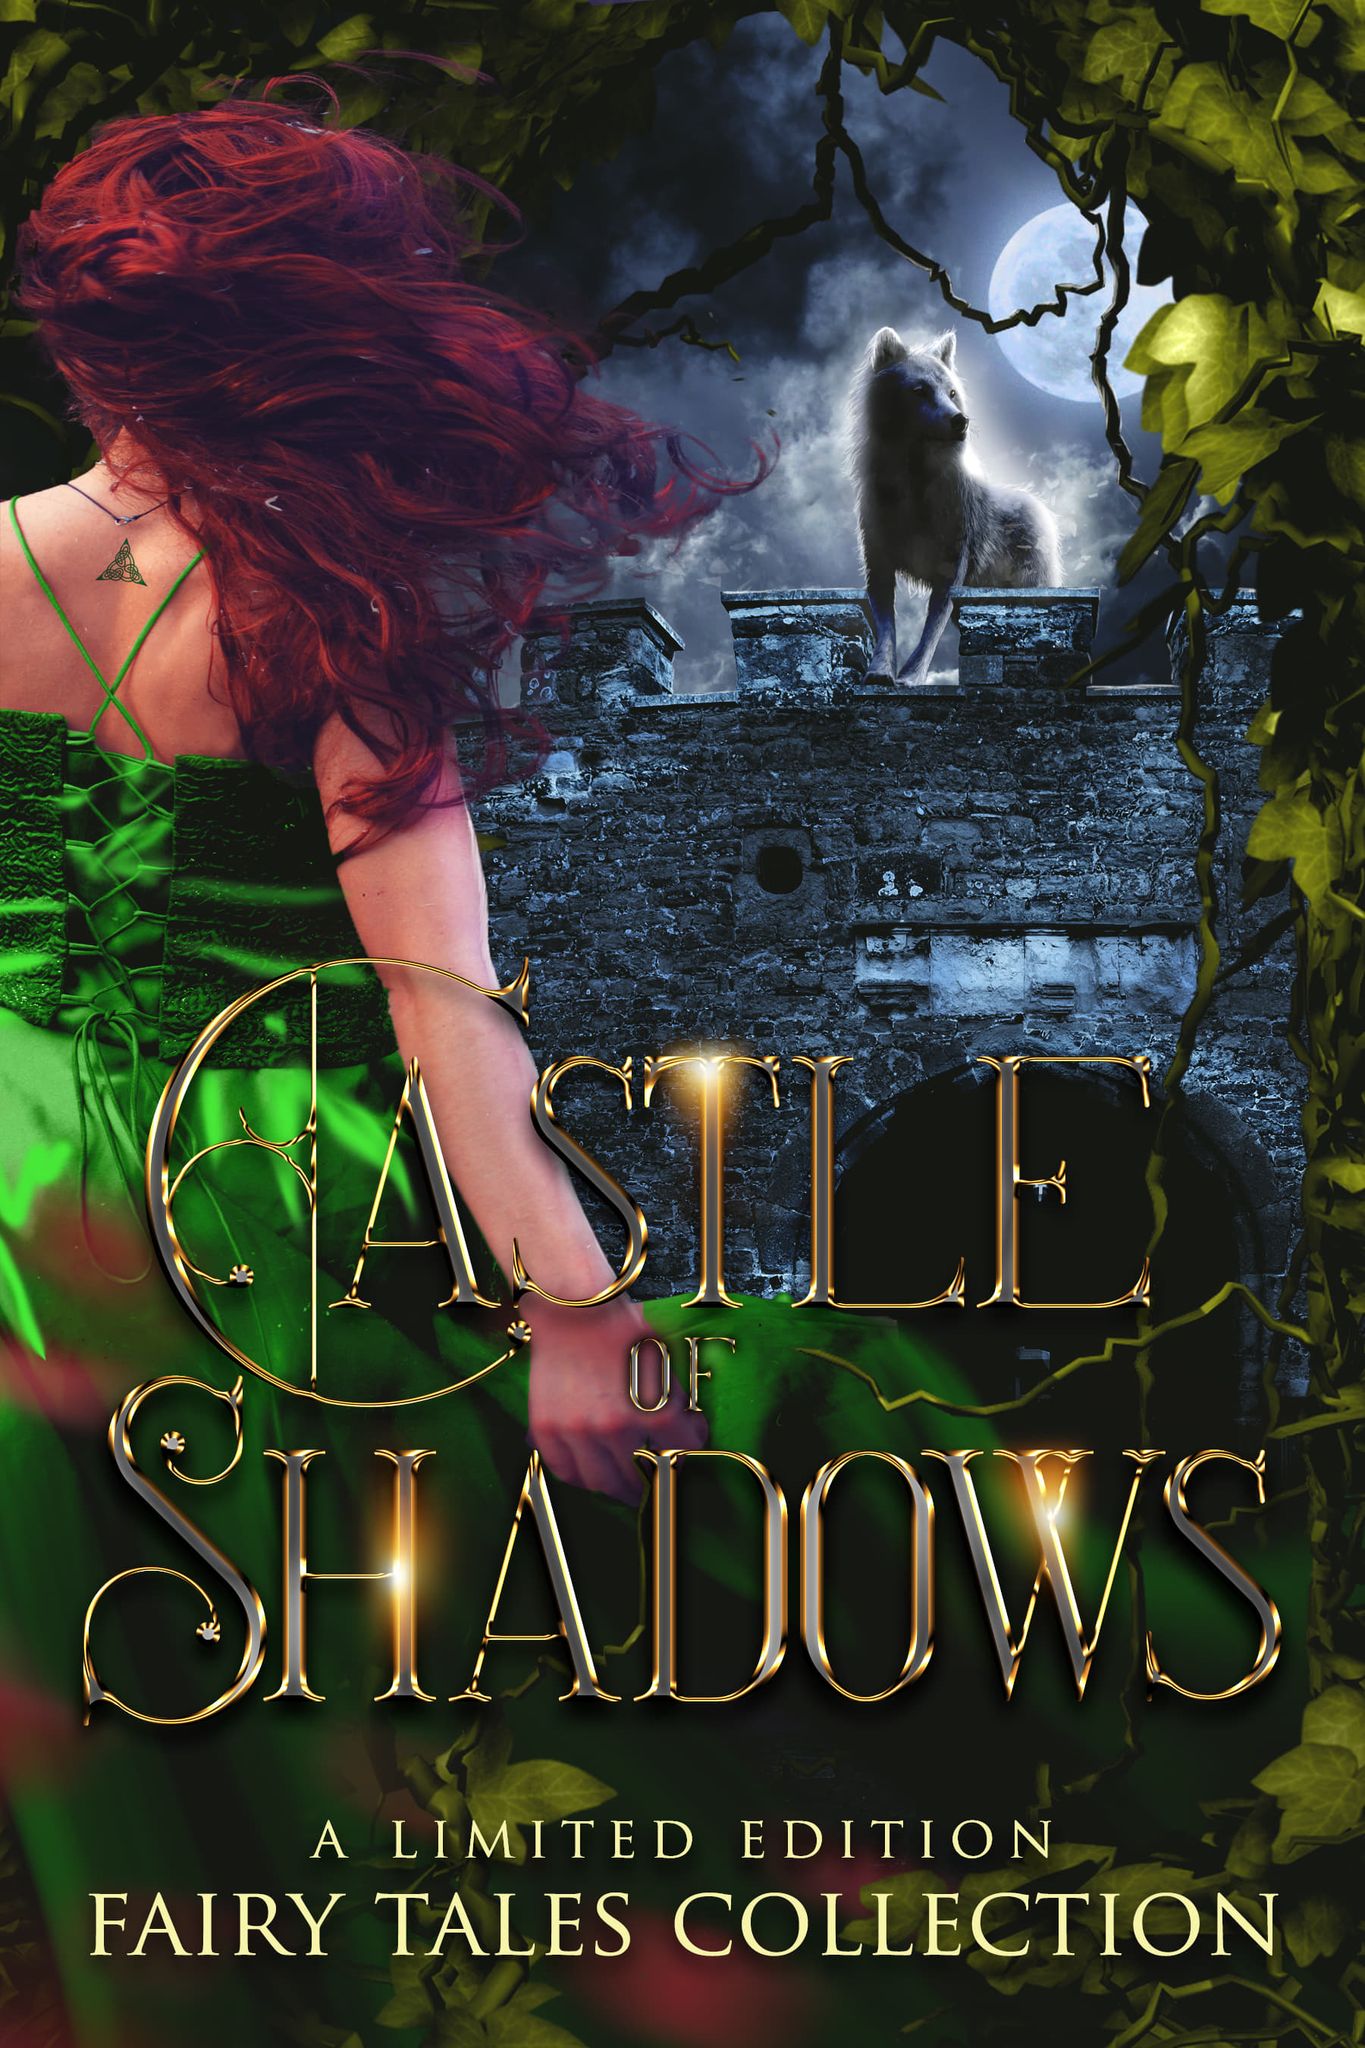 Castle of Shadows: A Limited Edition Fairy Tales Collection